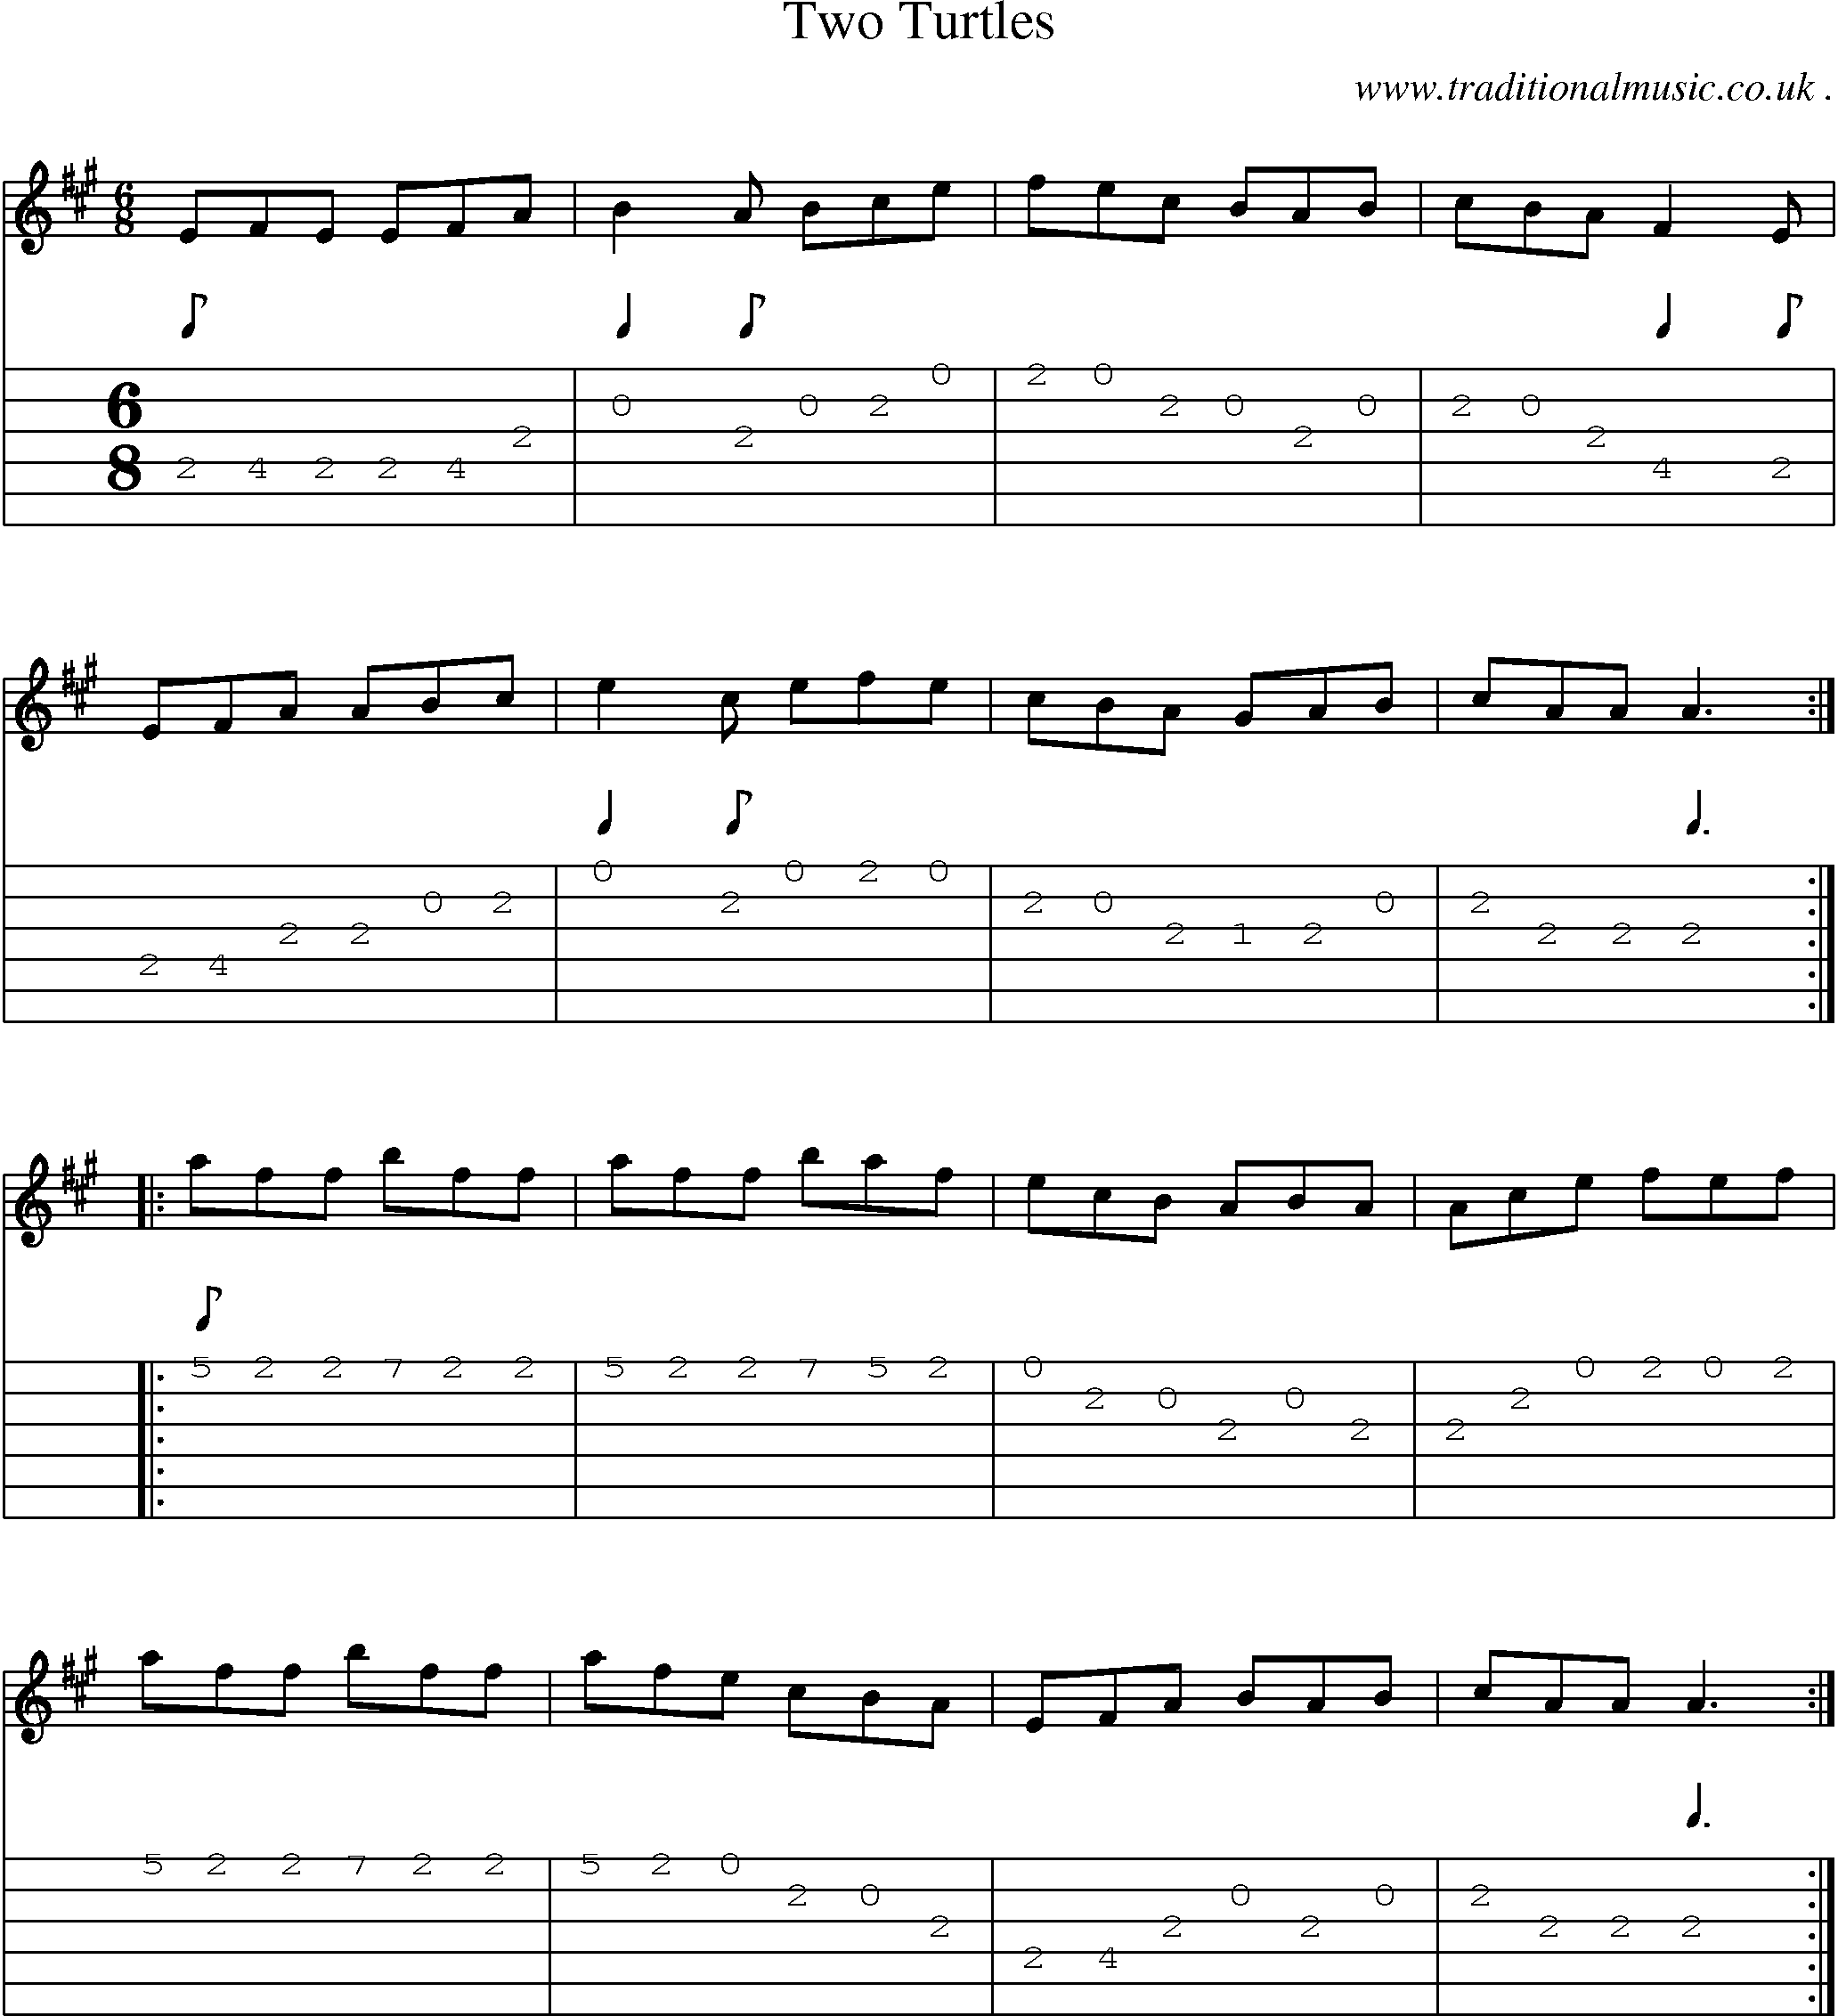 Sheet-Music and Guitar Tabs for Two Turtles